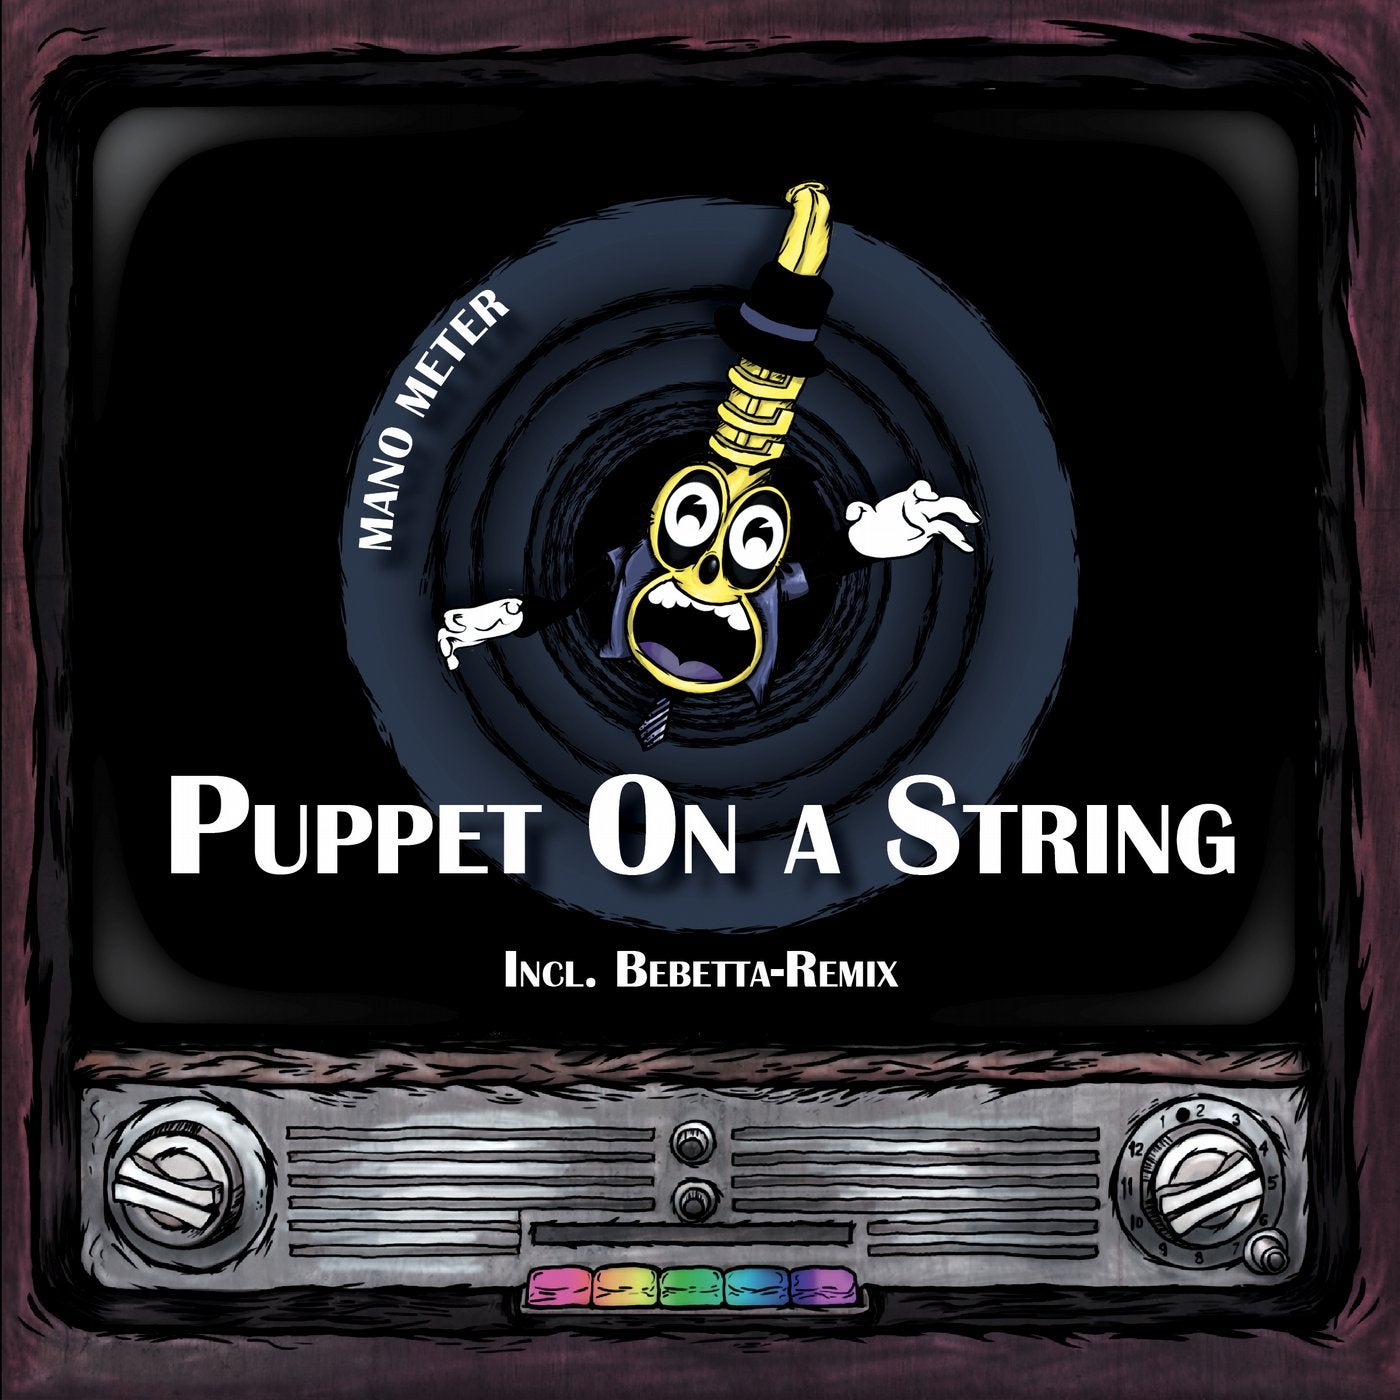 Puppet On a String